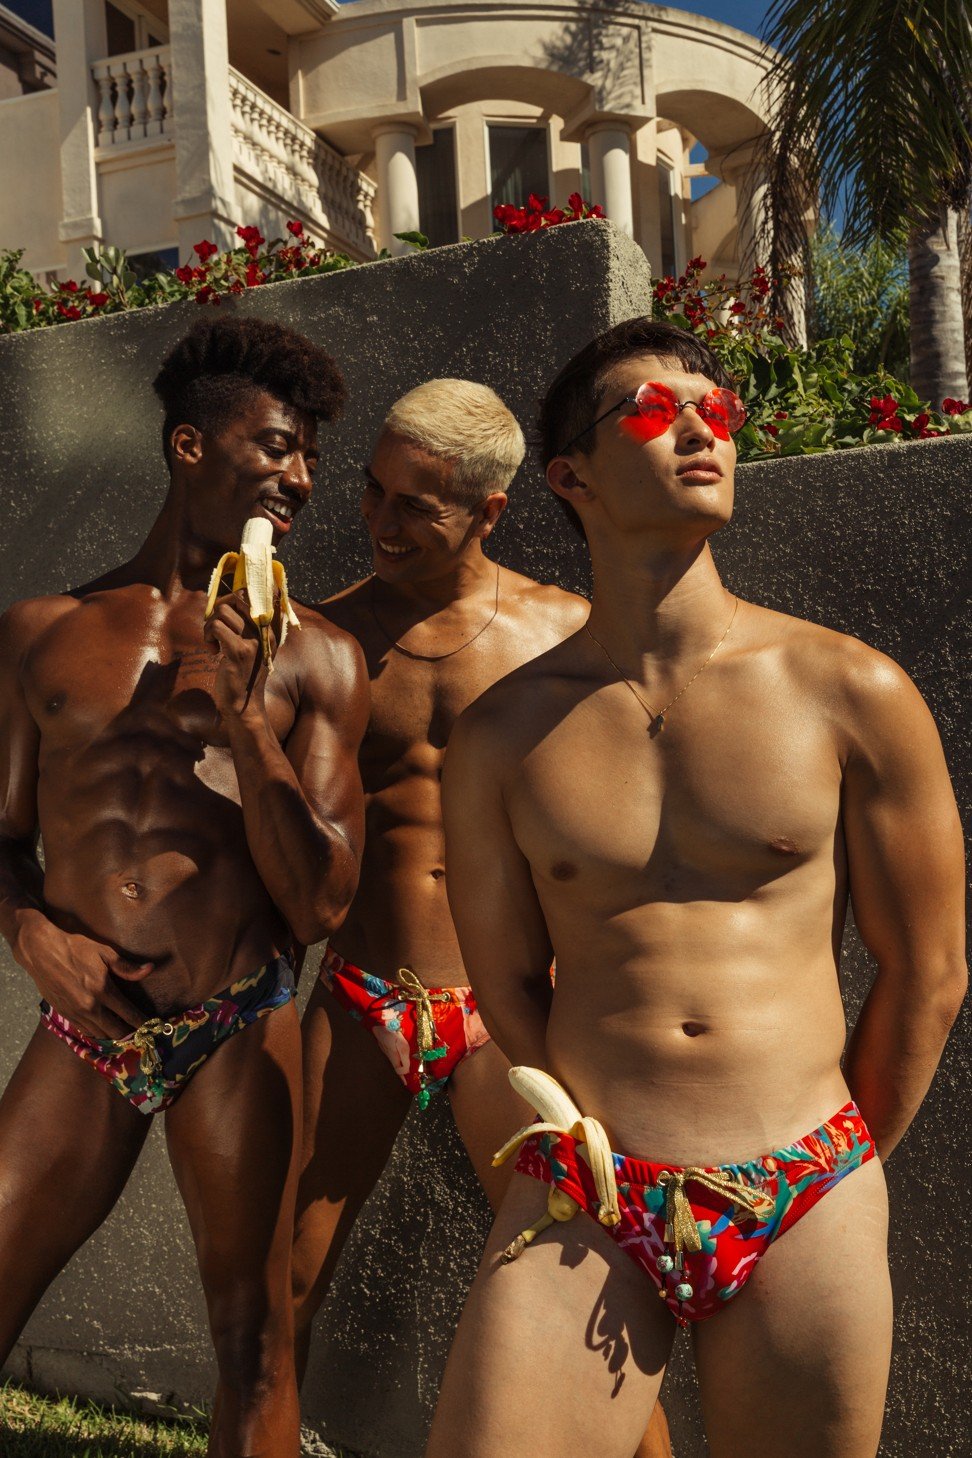 Swimwear and underwear targeting gay men gets boost in Asia as